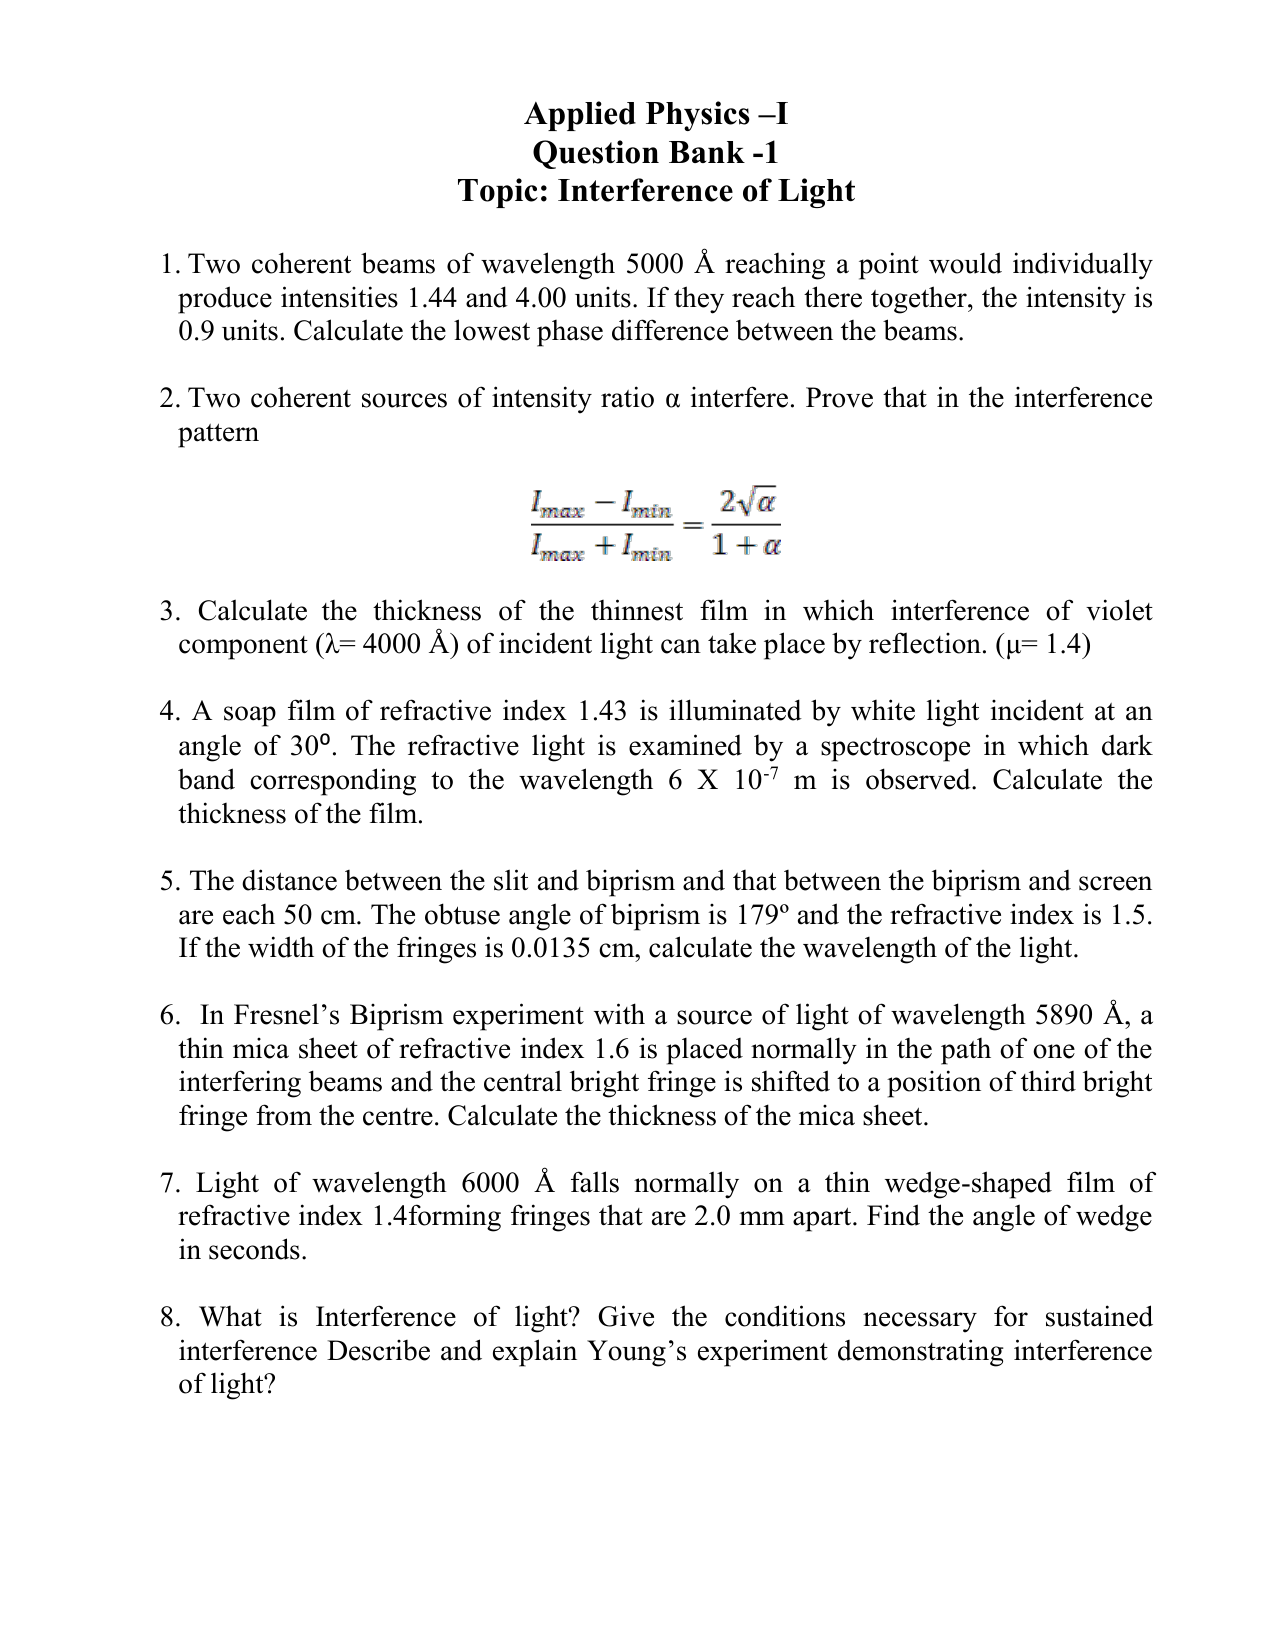 Question Bank Physics Part1 Updated 9 July 12